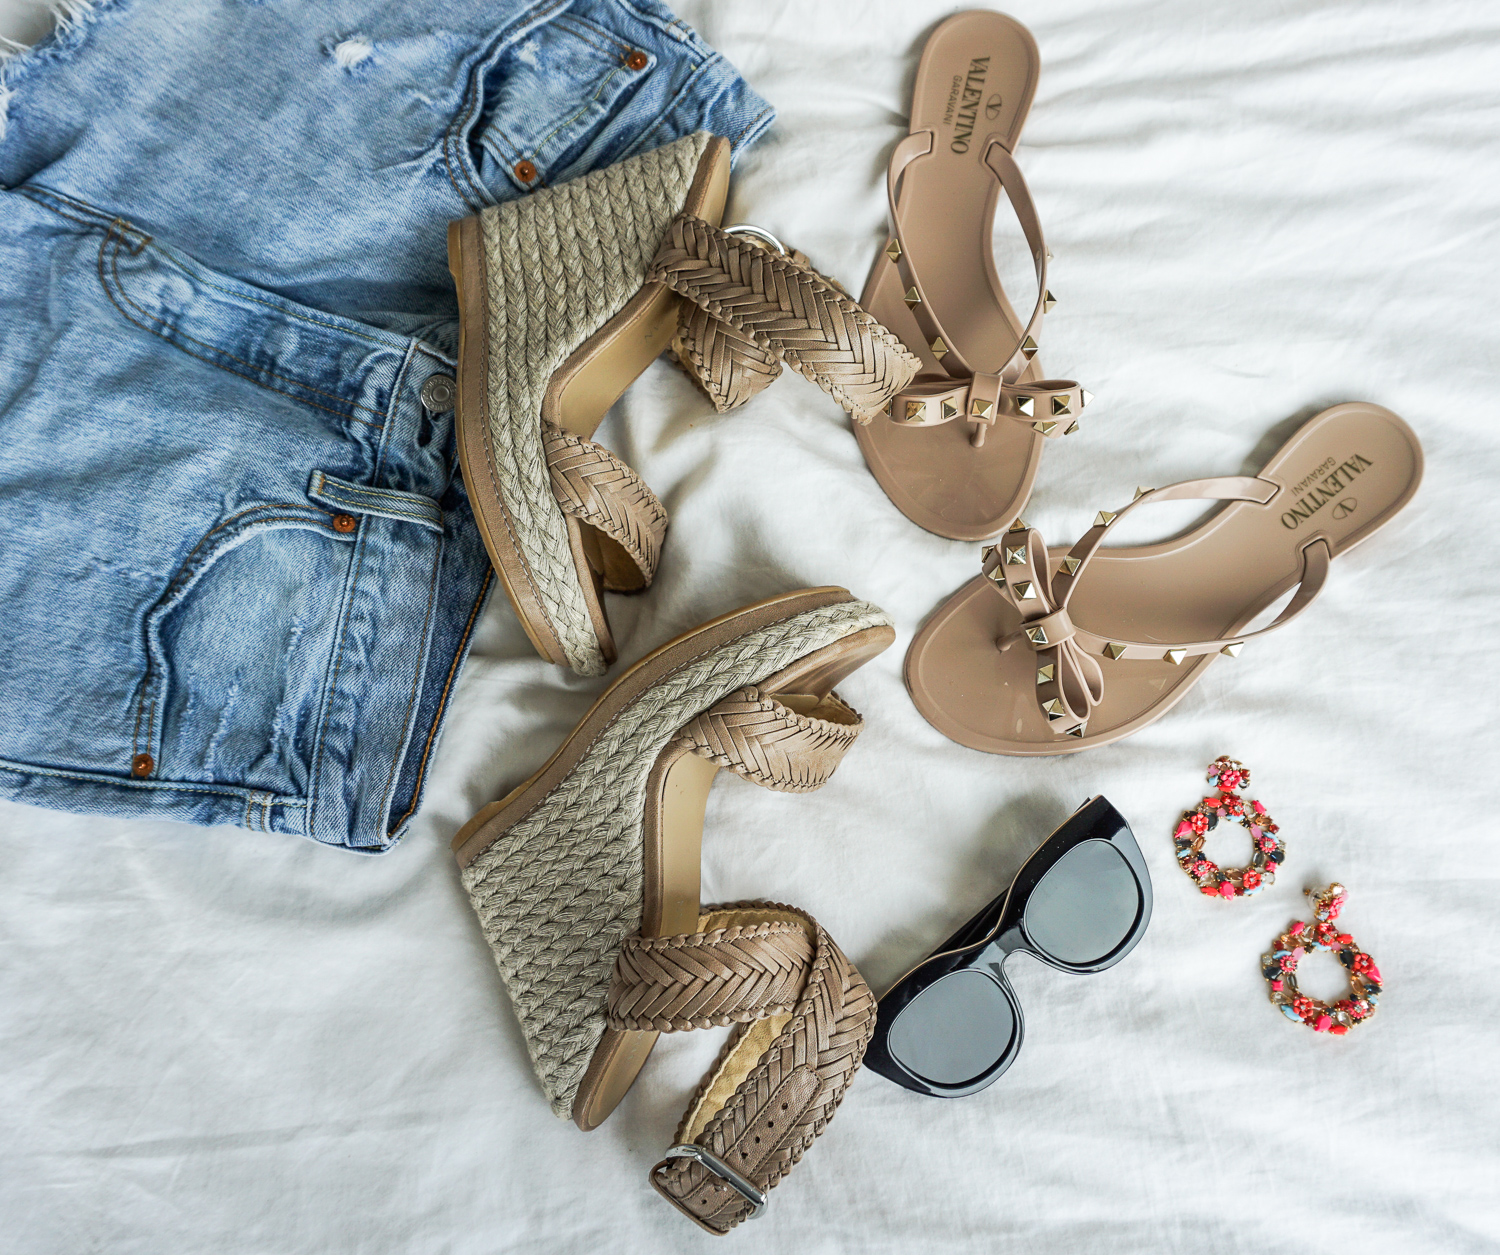 wedges and flip flops